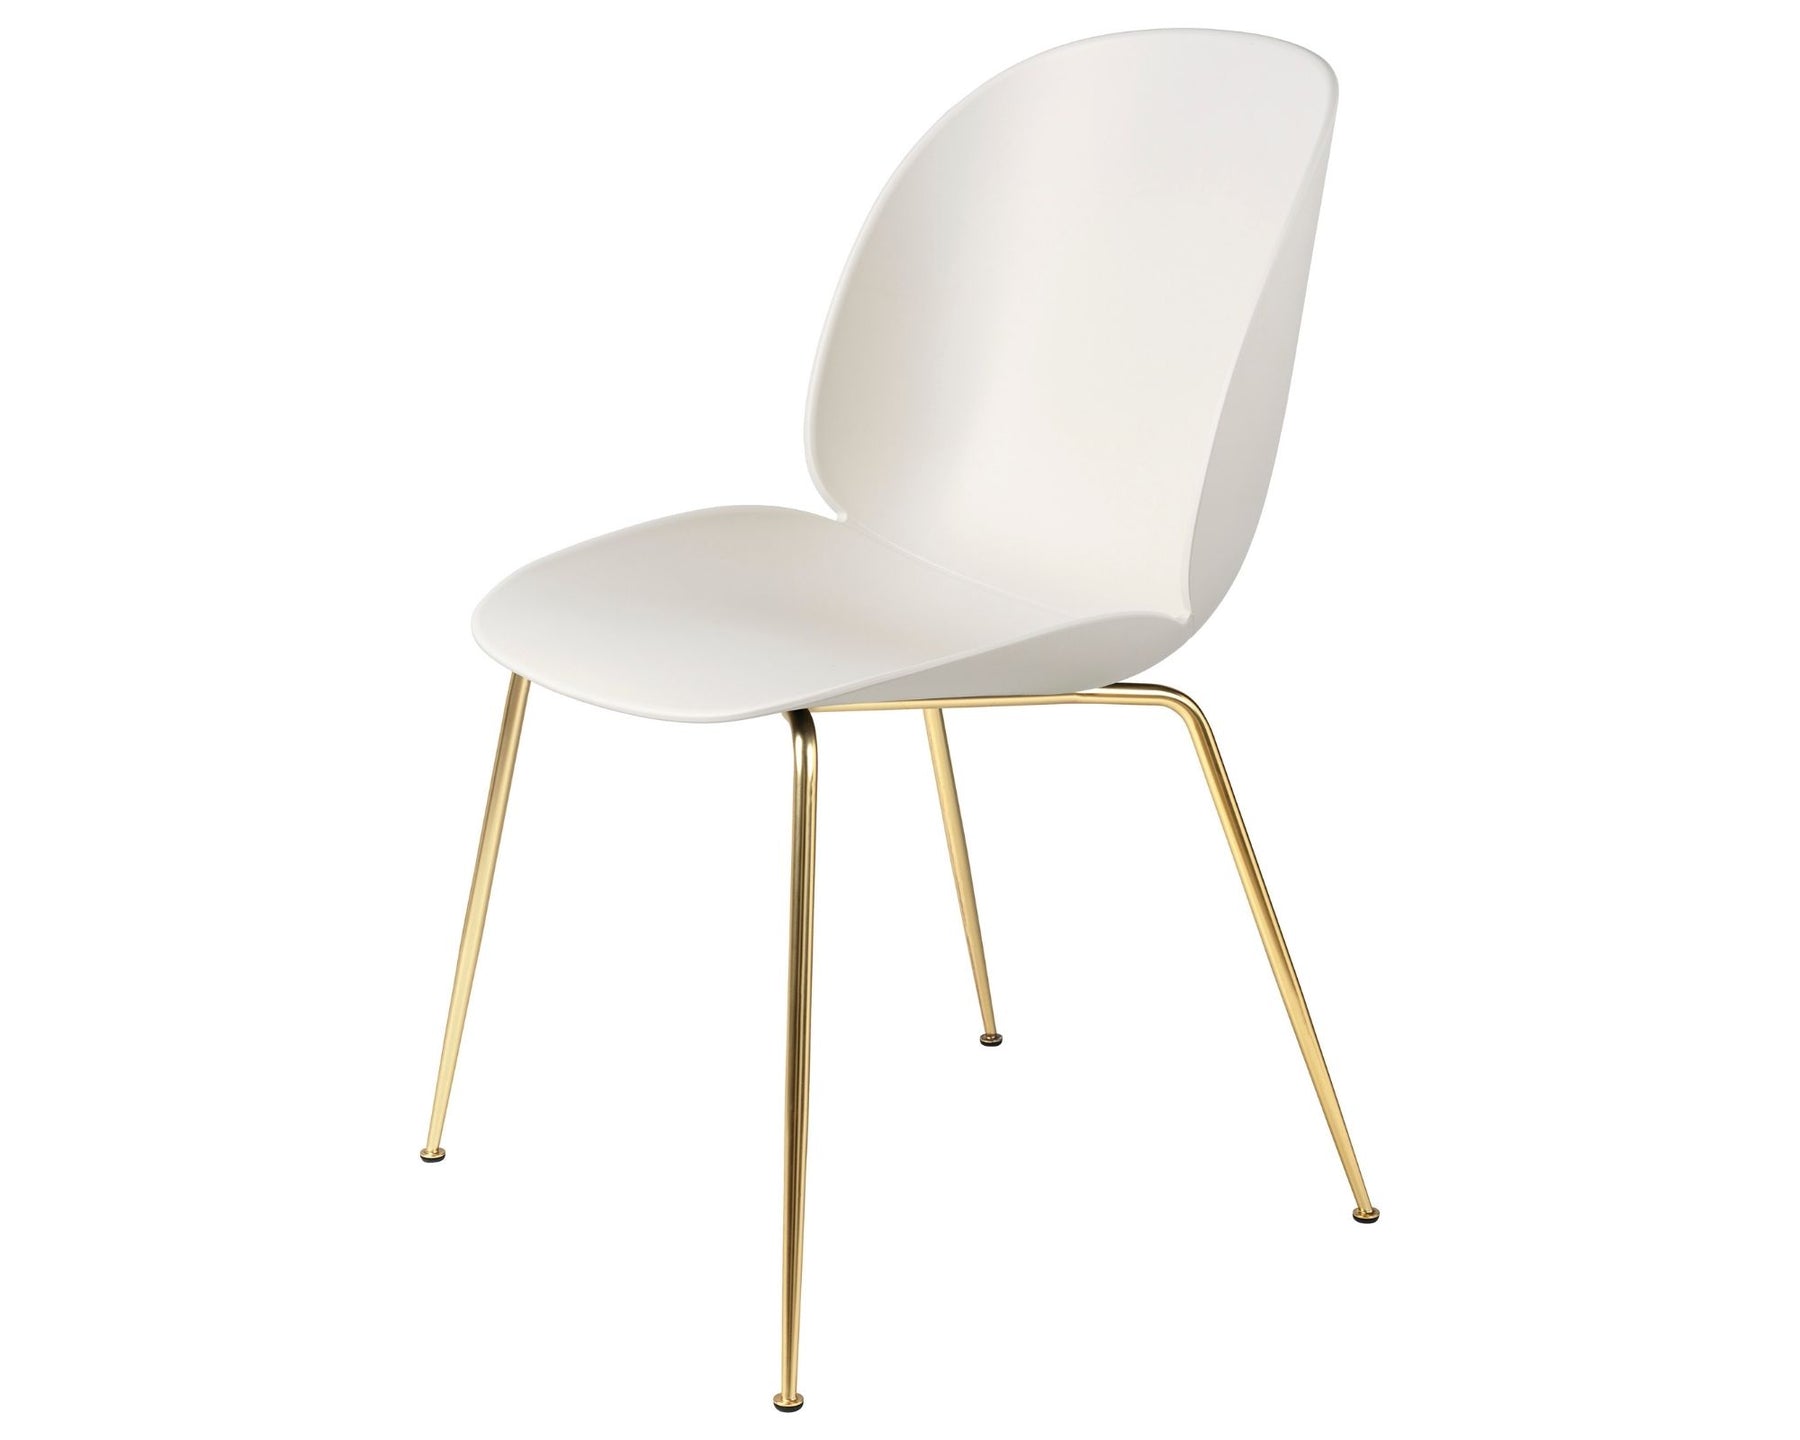 Alabaster White Dining Chair with Brass Base | DSHOP